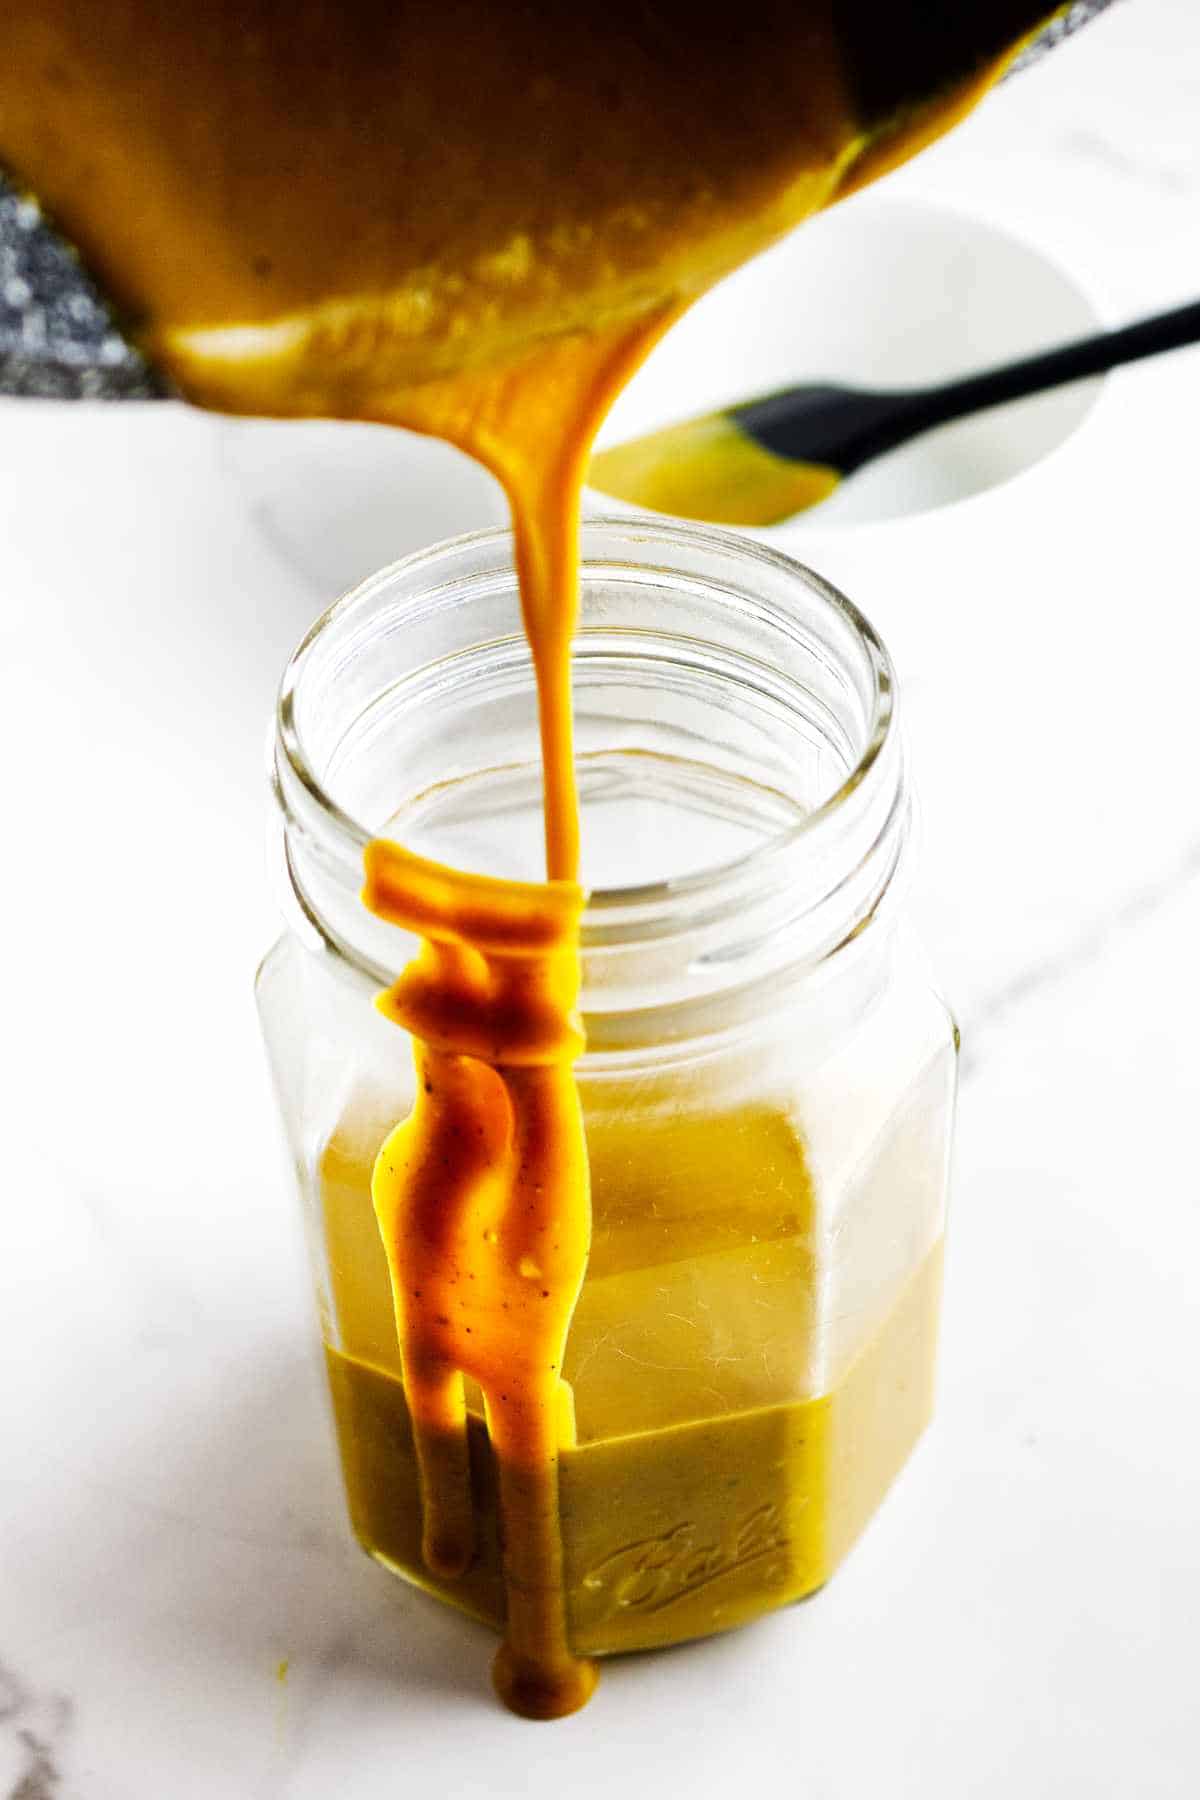 pouring gold barbeque sauce into a Mason jar.